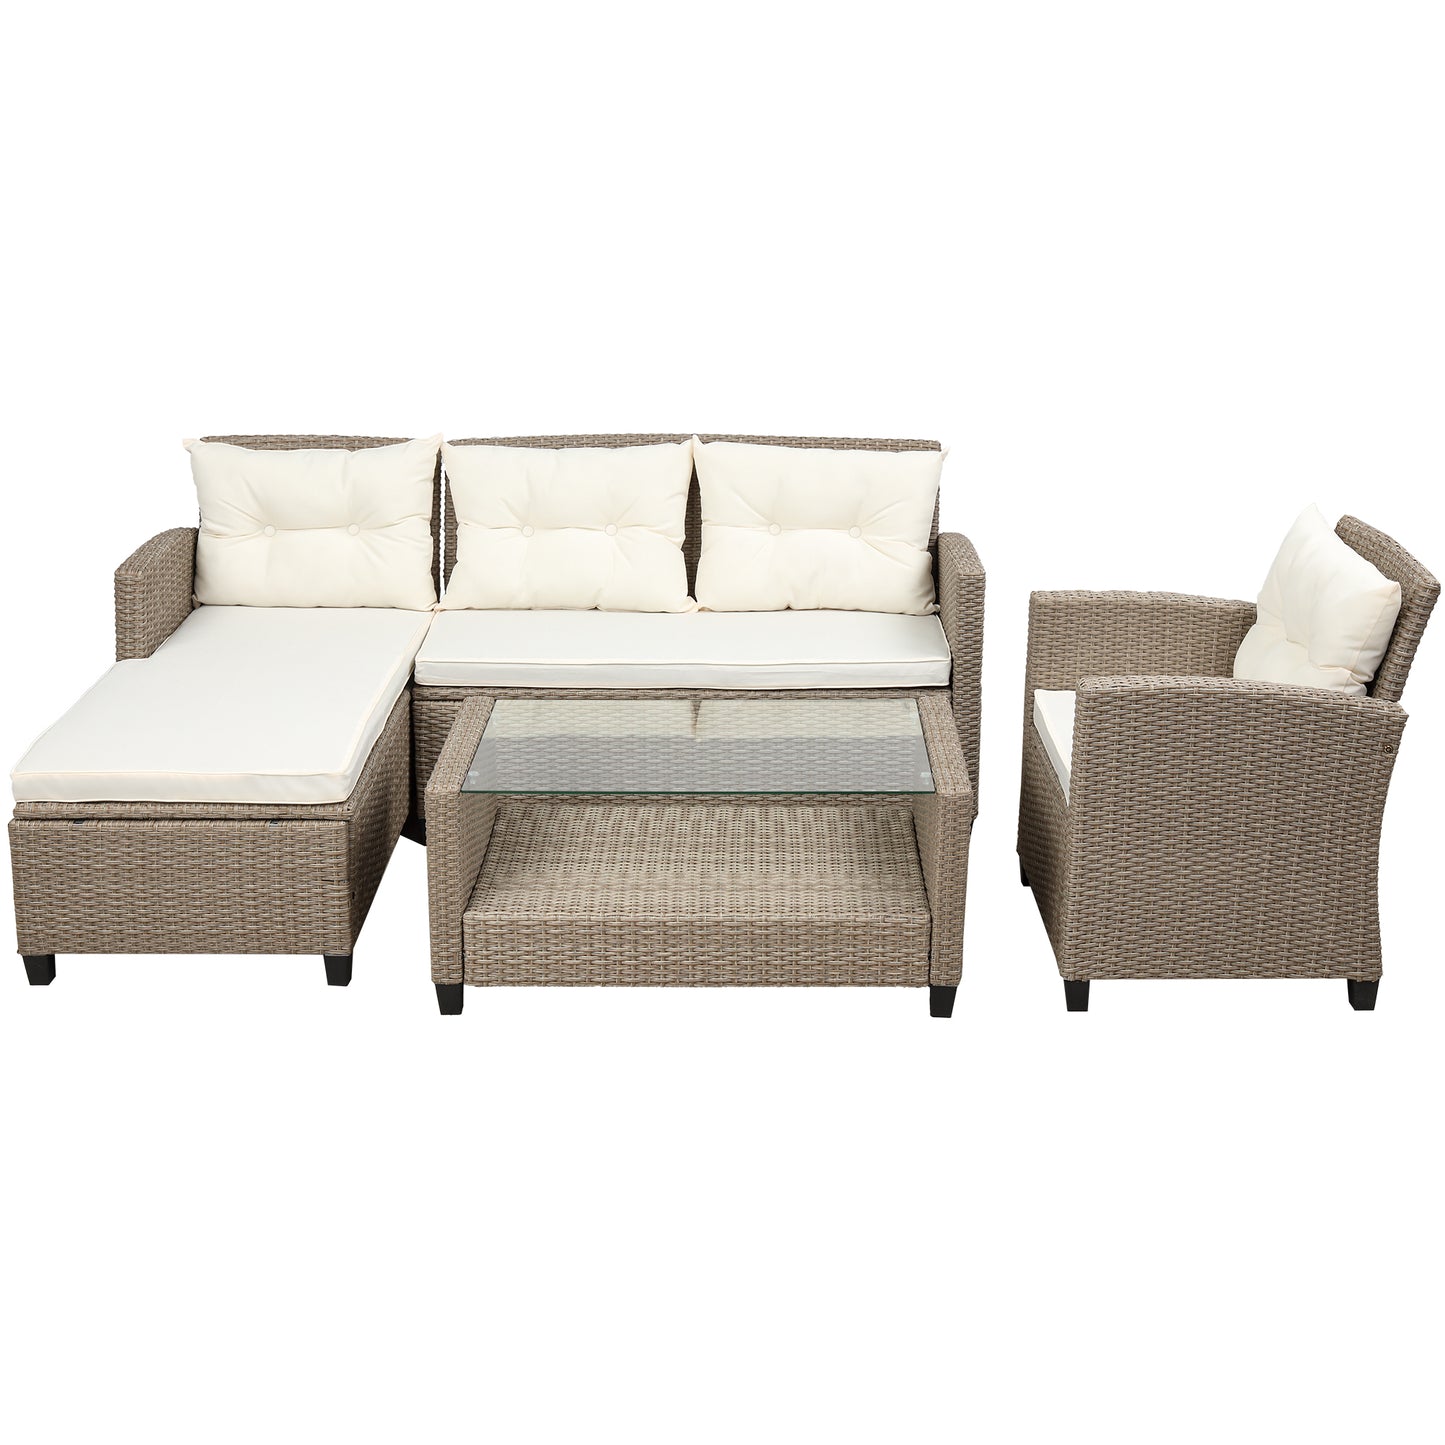 U_STYLE Outdoor Patio Furniture Sets